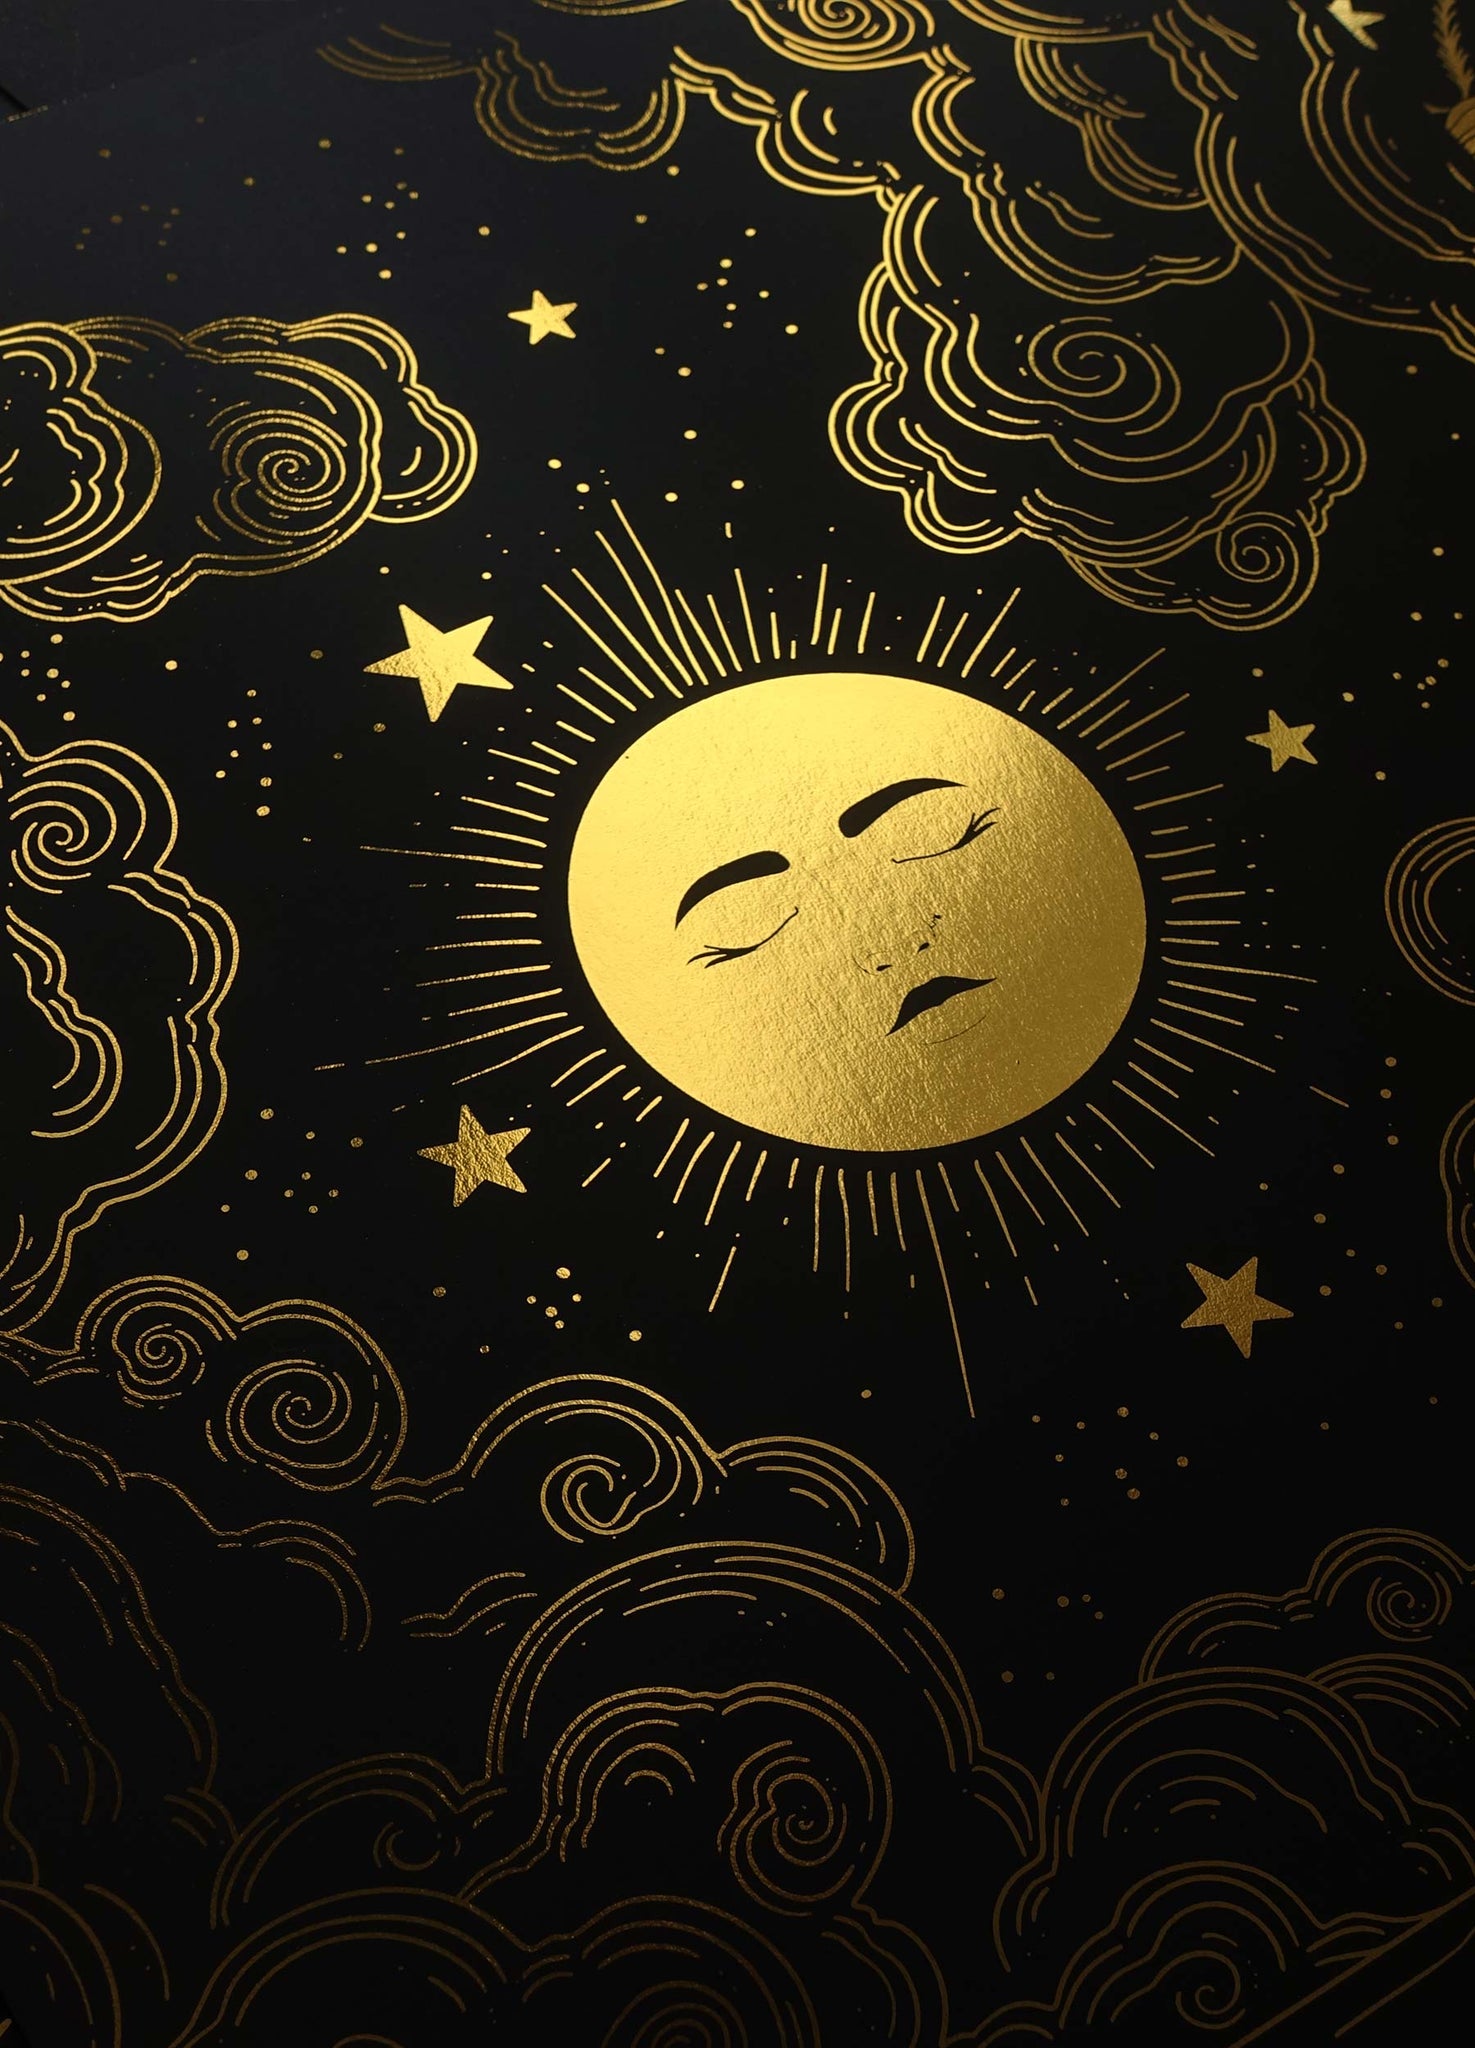 Full Moon glow n the night sky gold foil art print on black paper by Cocorrina & Co